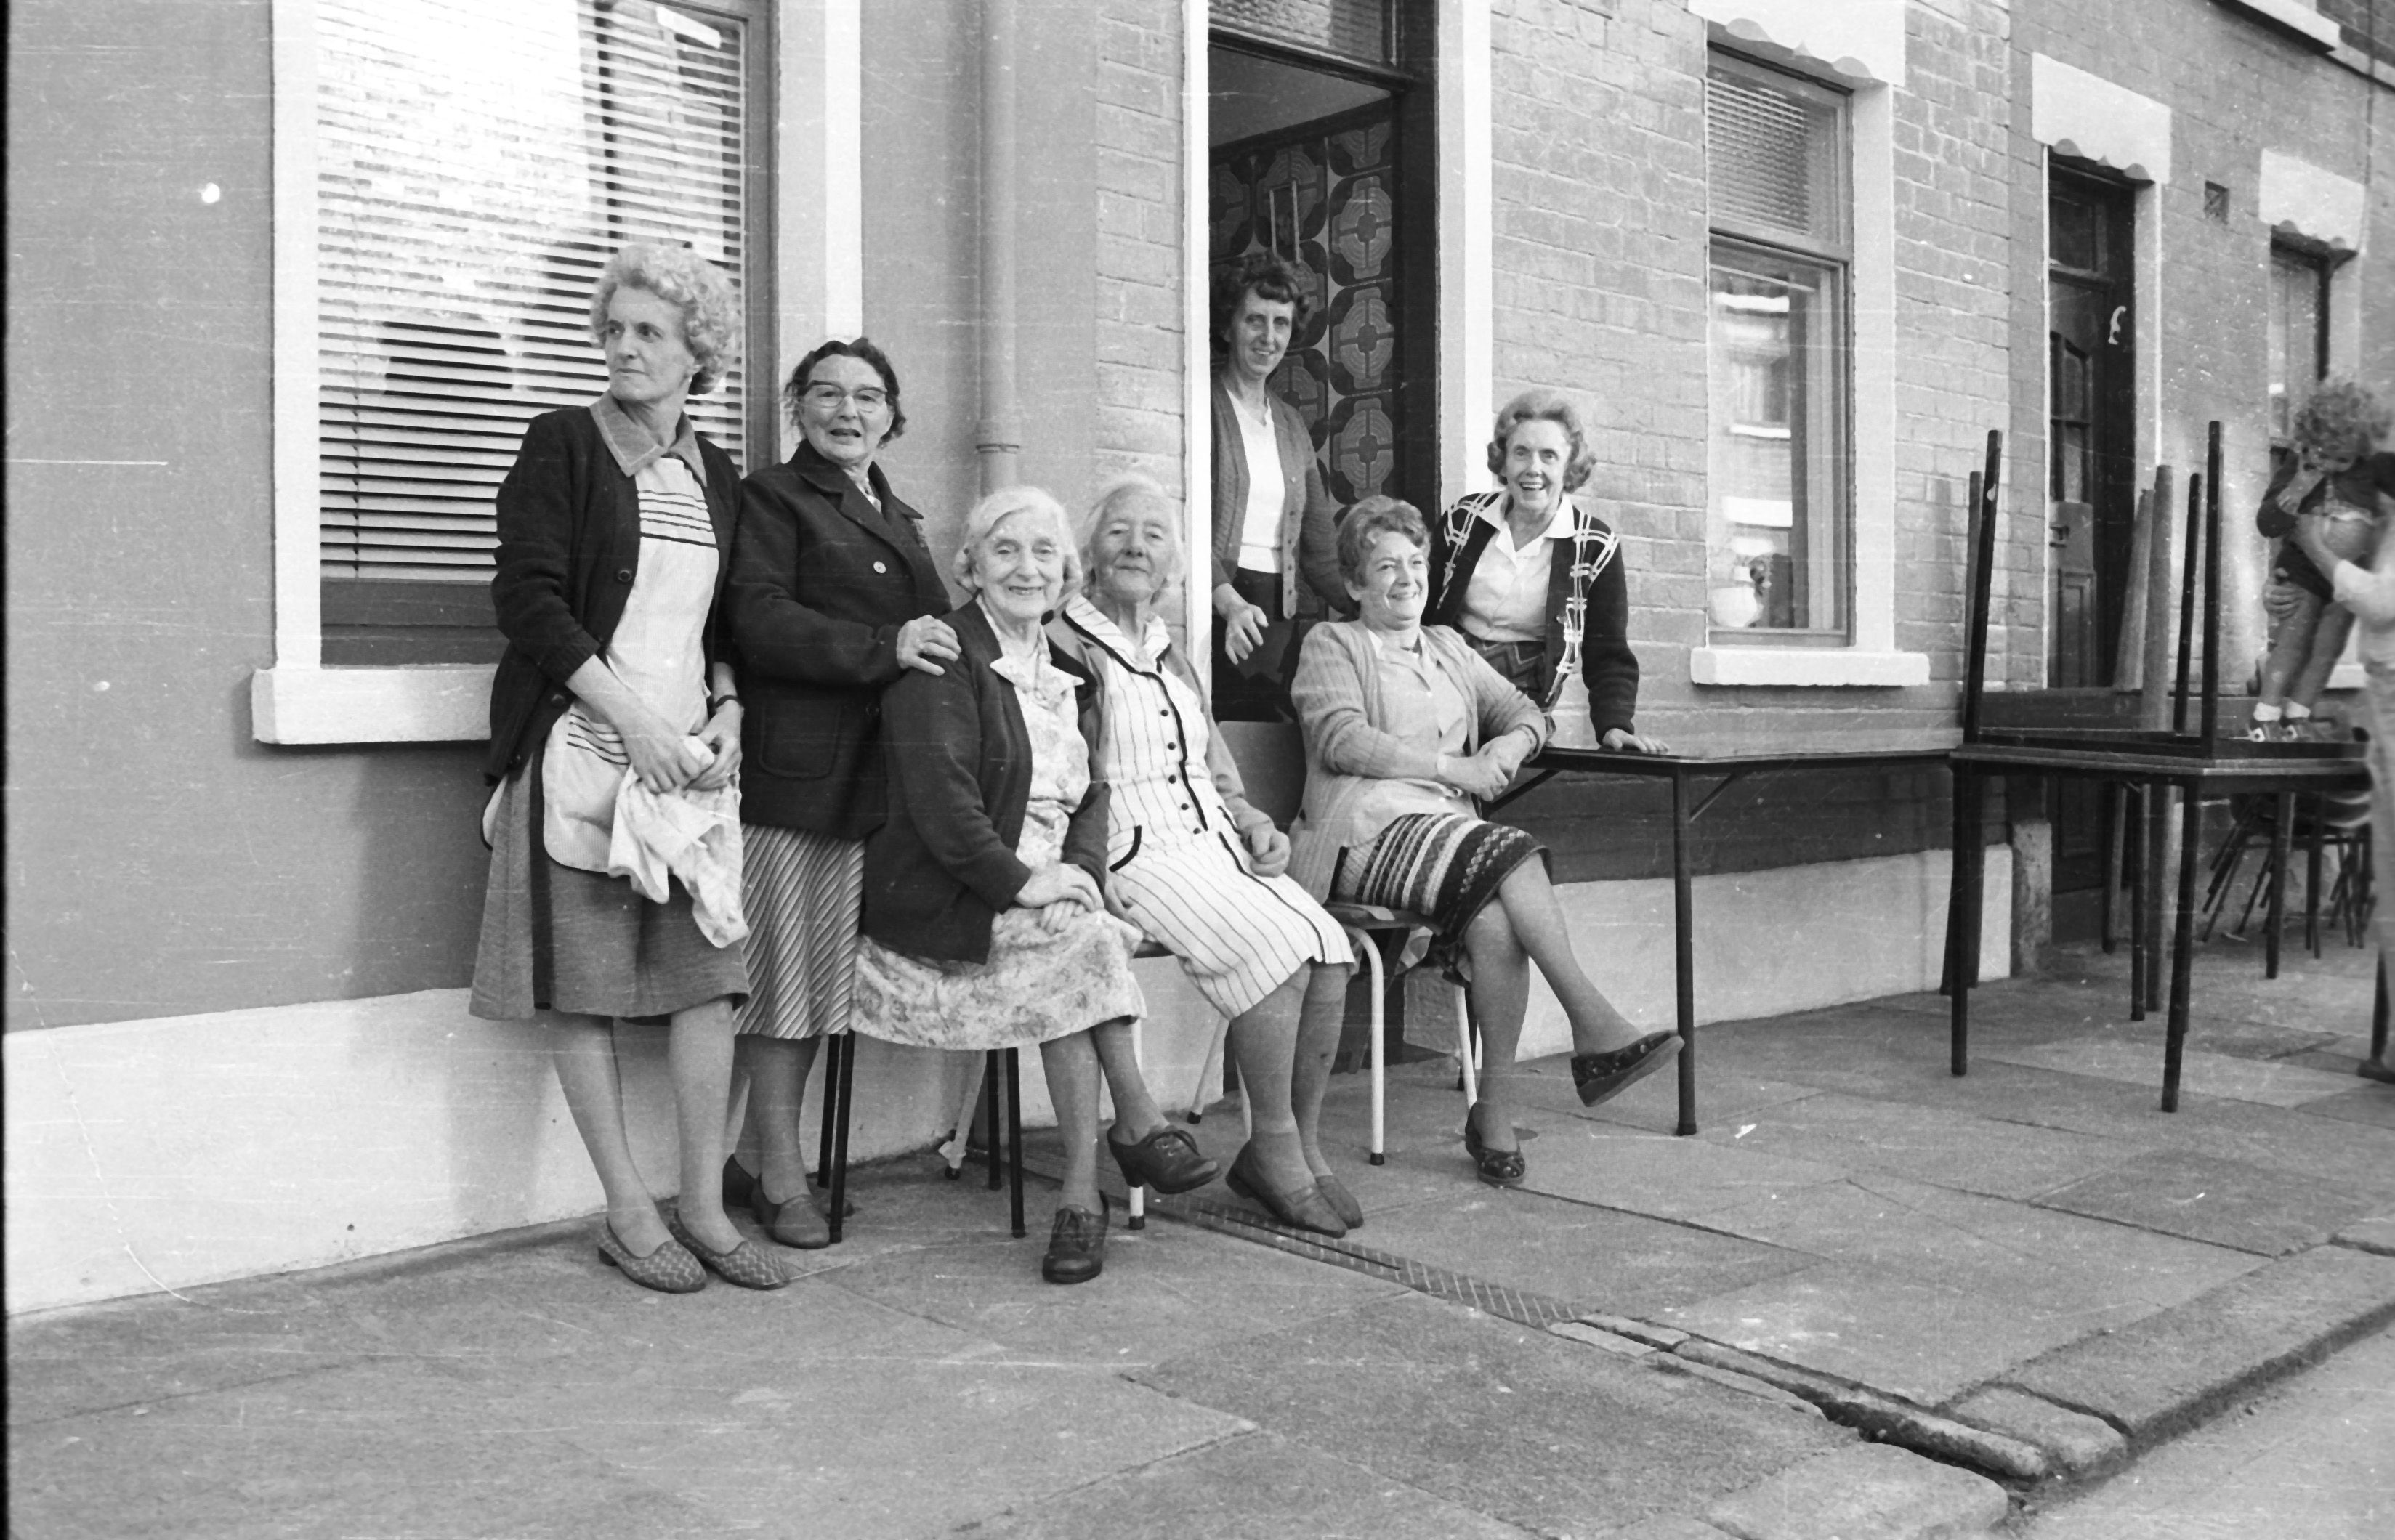 TAKING IT EASY: These ladies were enjoying a street party as the summer of 1979 came to end